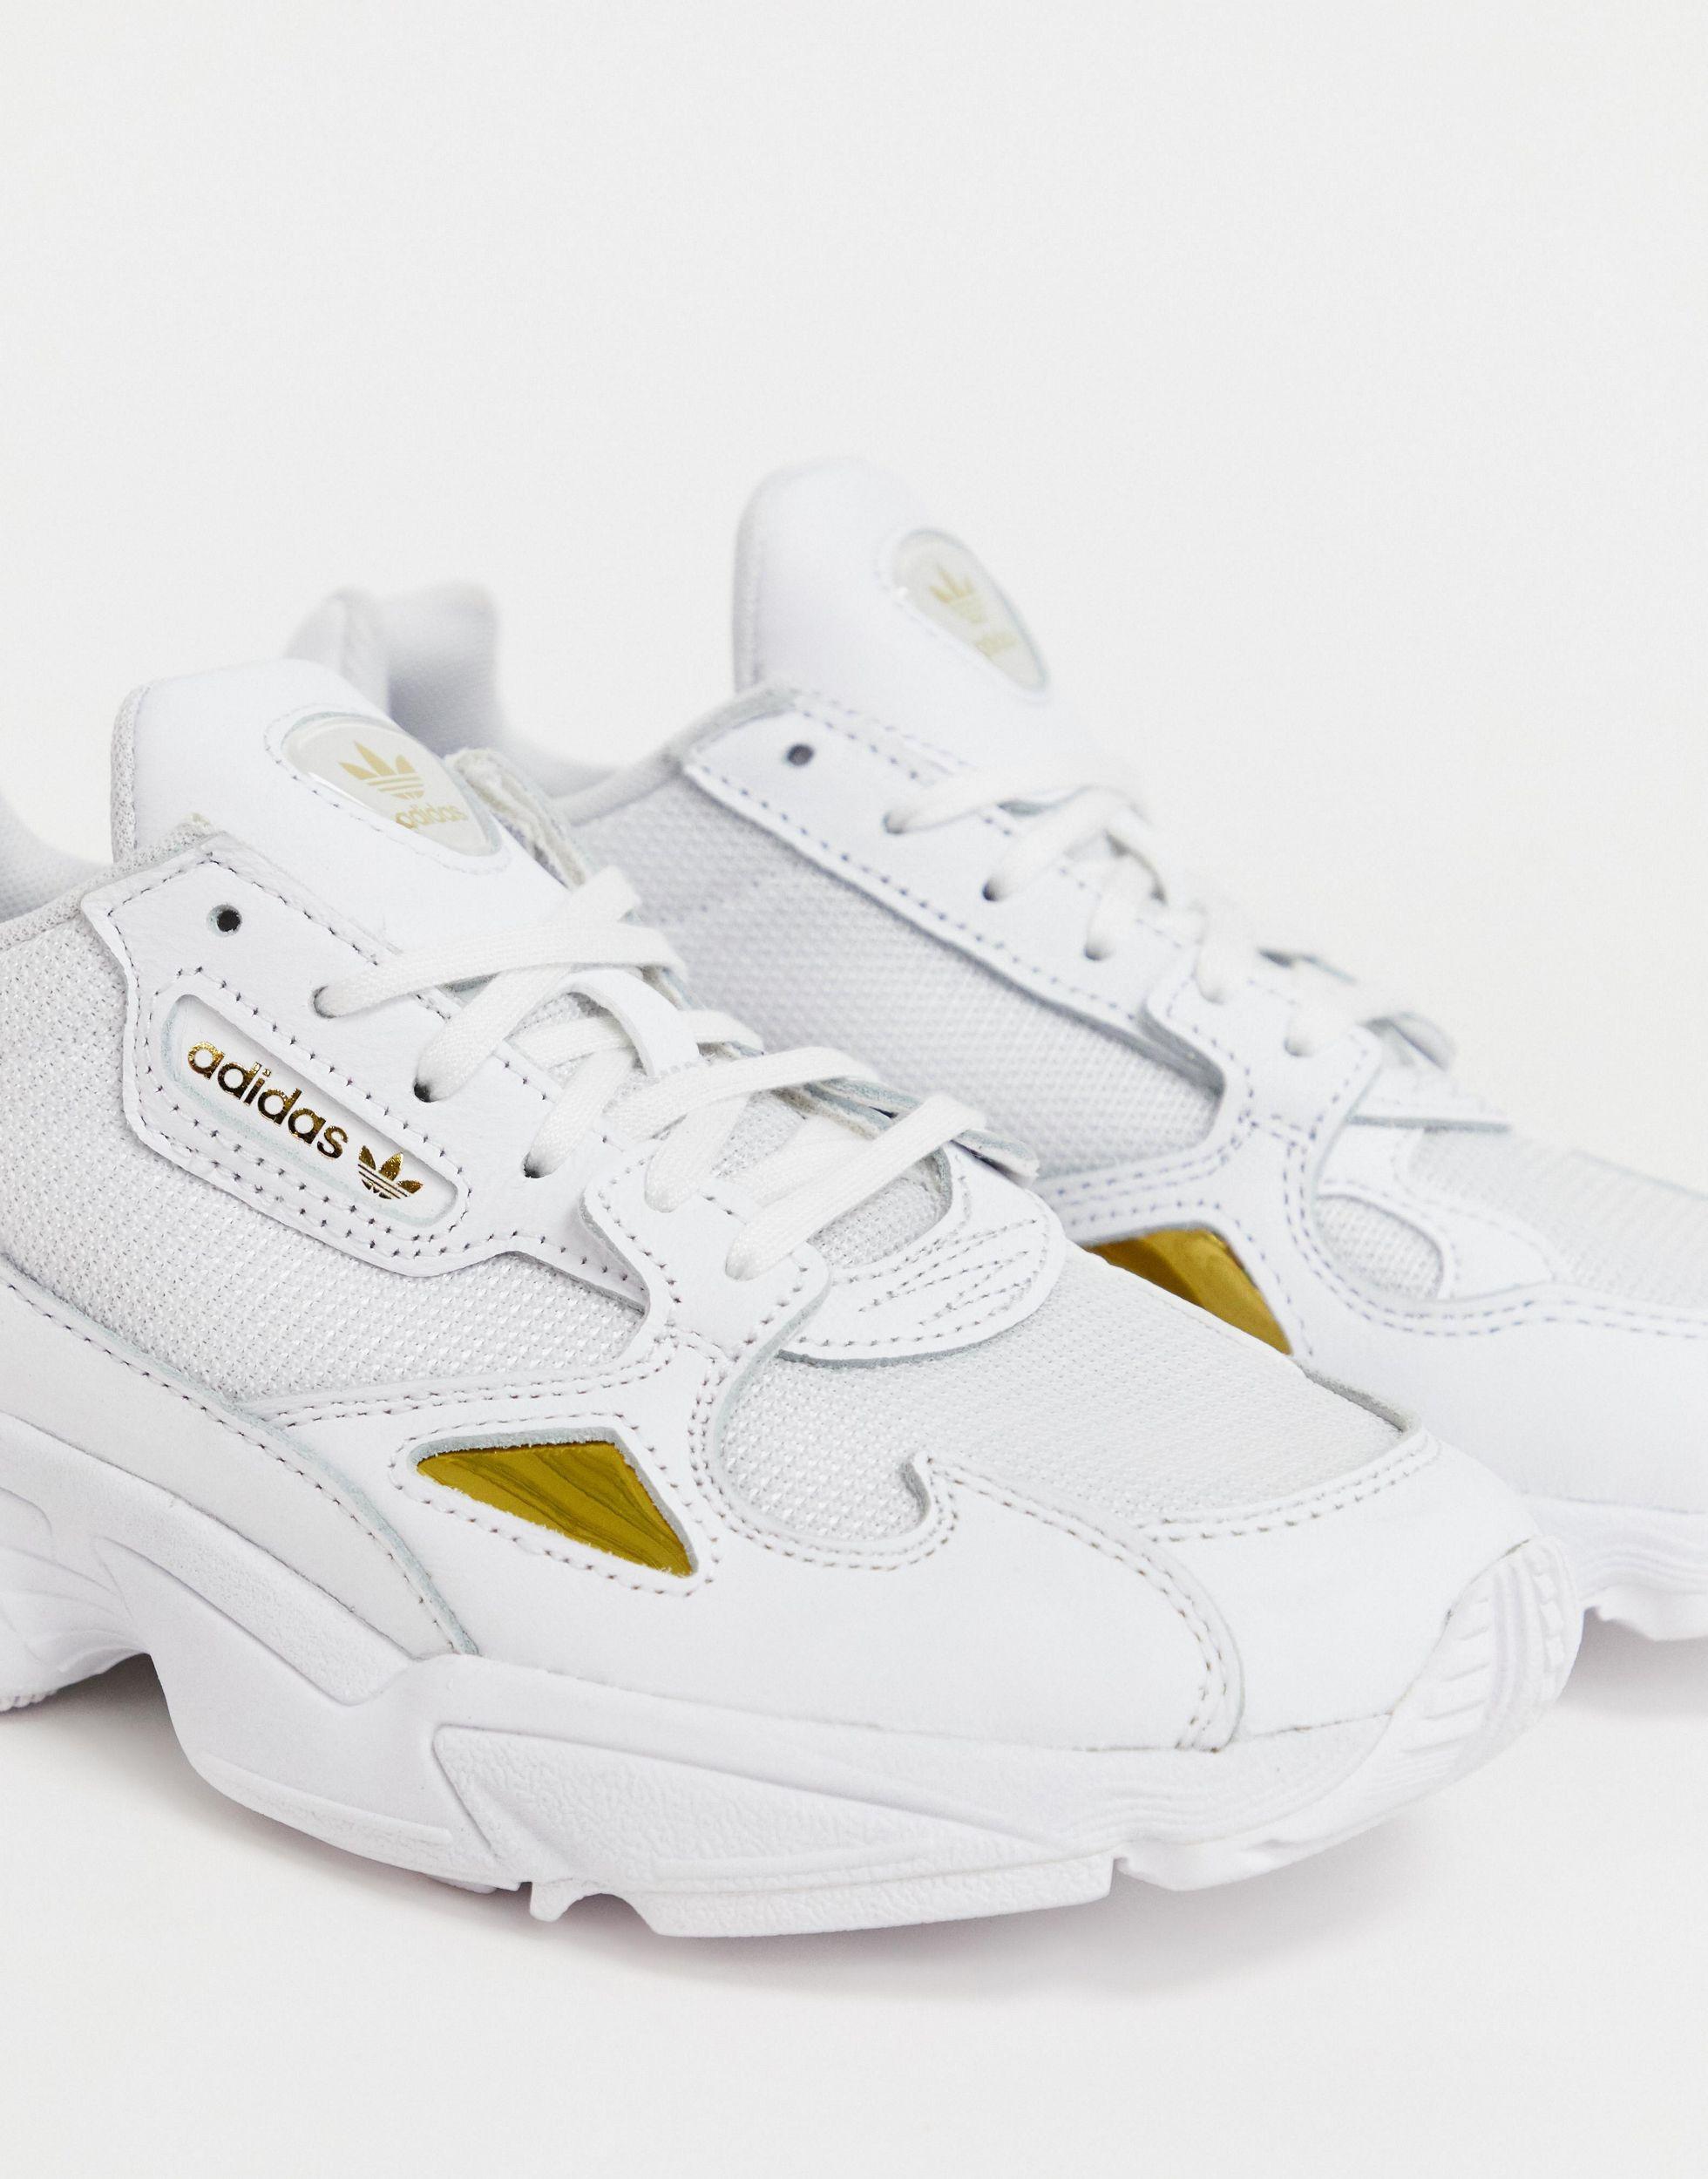 adidas Originals Leather Falcon Trainers in White / Gold (White) - Lyst